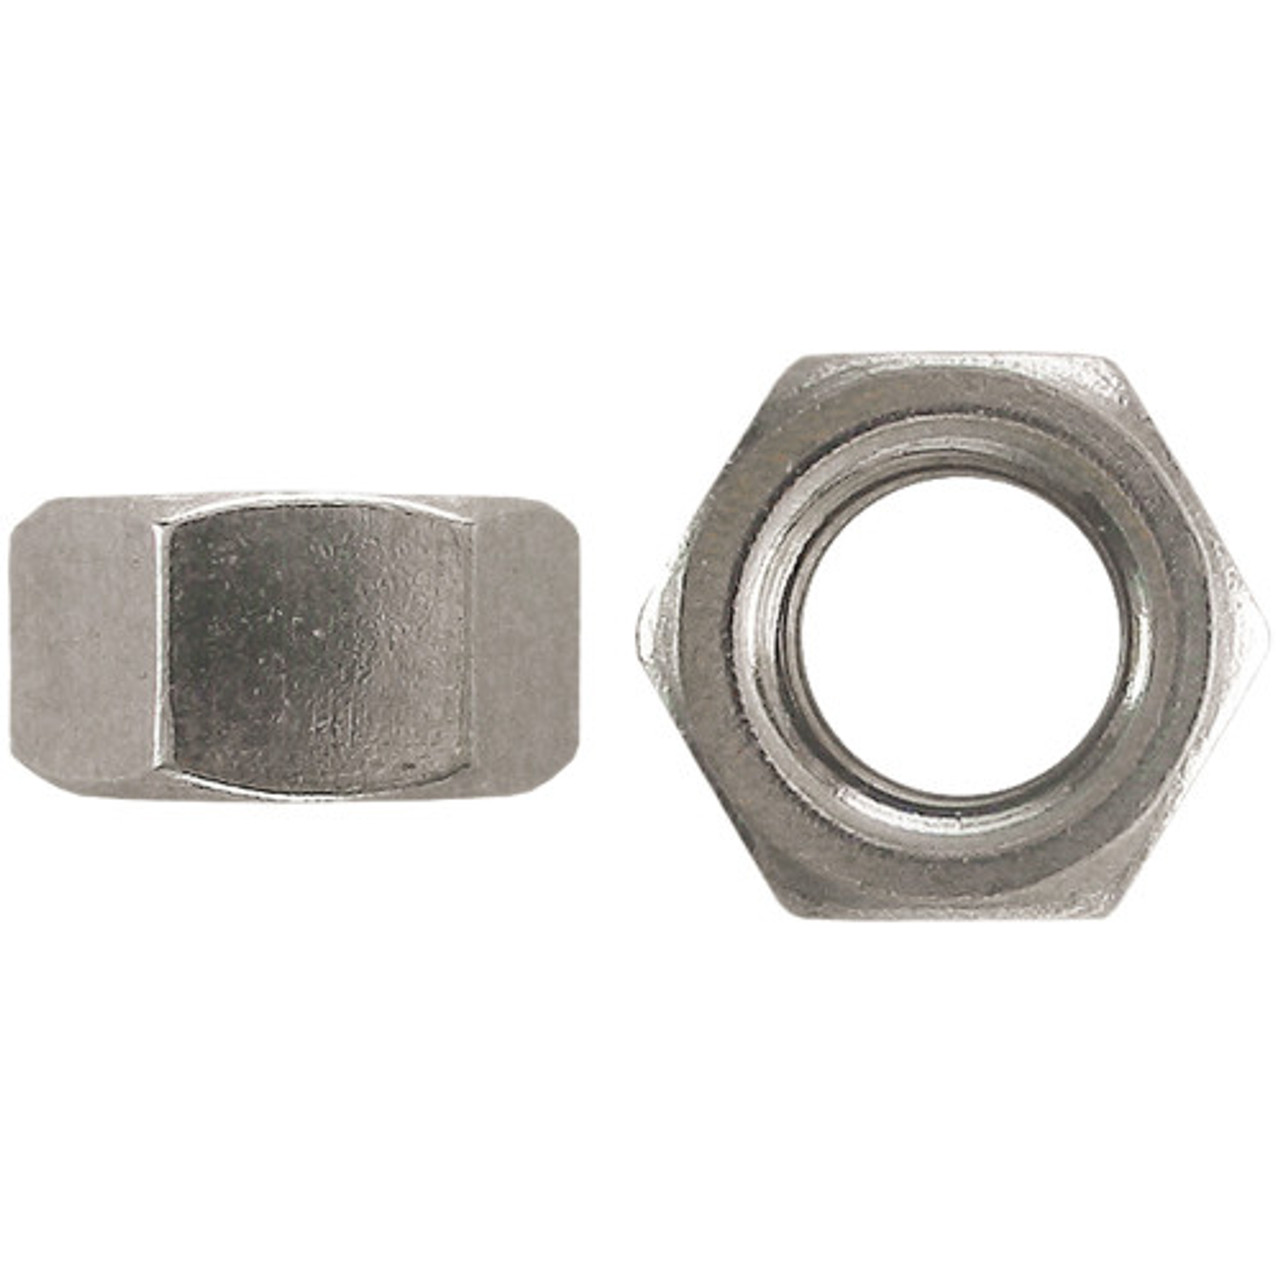 1/4"-20 UNC 316 Stainless Steel Hex Nut 100 Pc.   5226-014